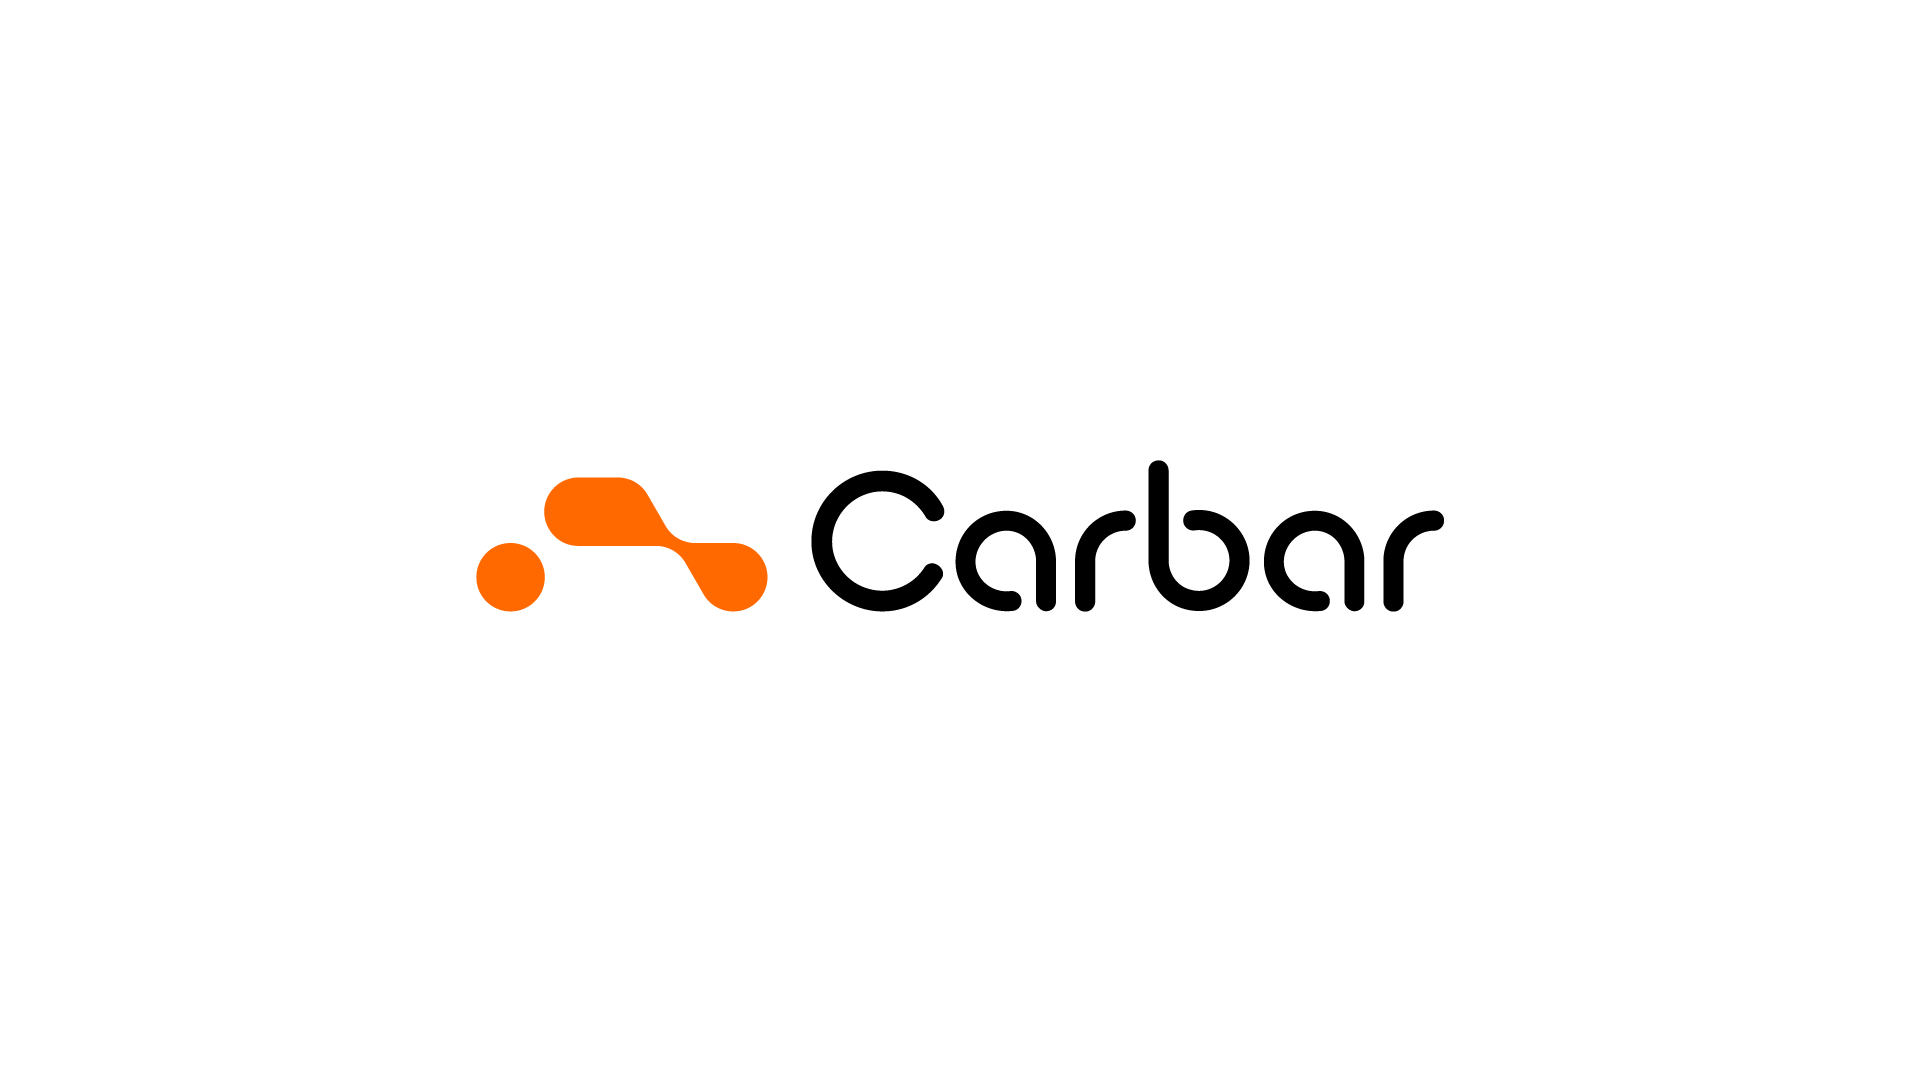 Carbar - Car-Sharing Service logo, abstract car shape built with fluid elements, representing dynamic and flexible car-sharing services